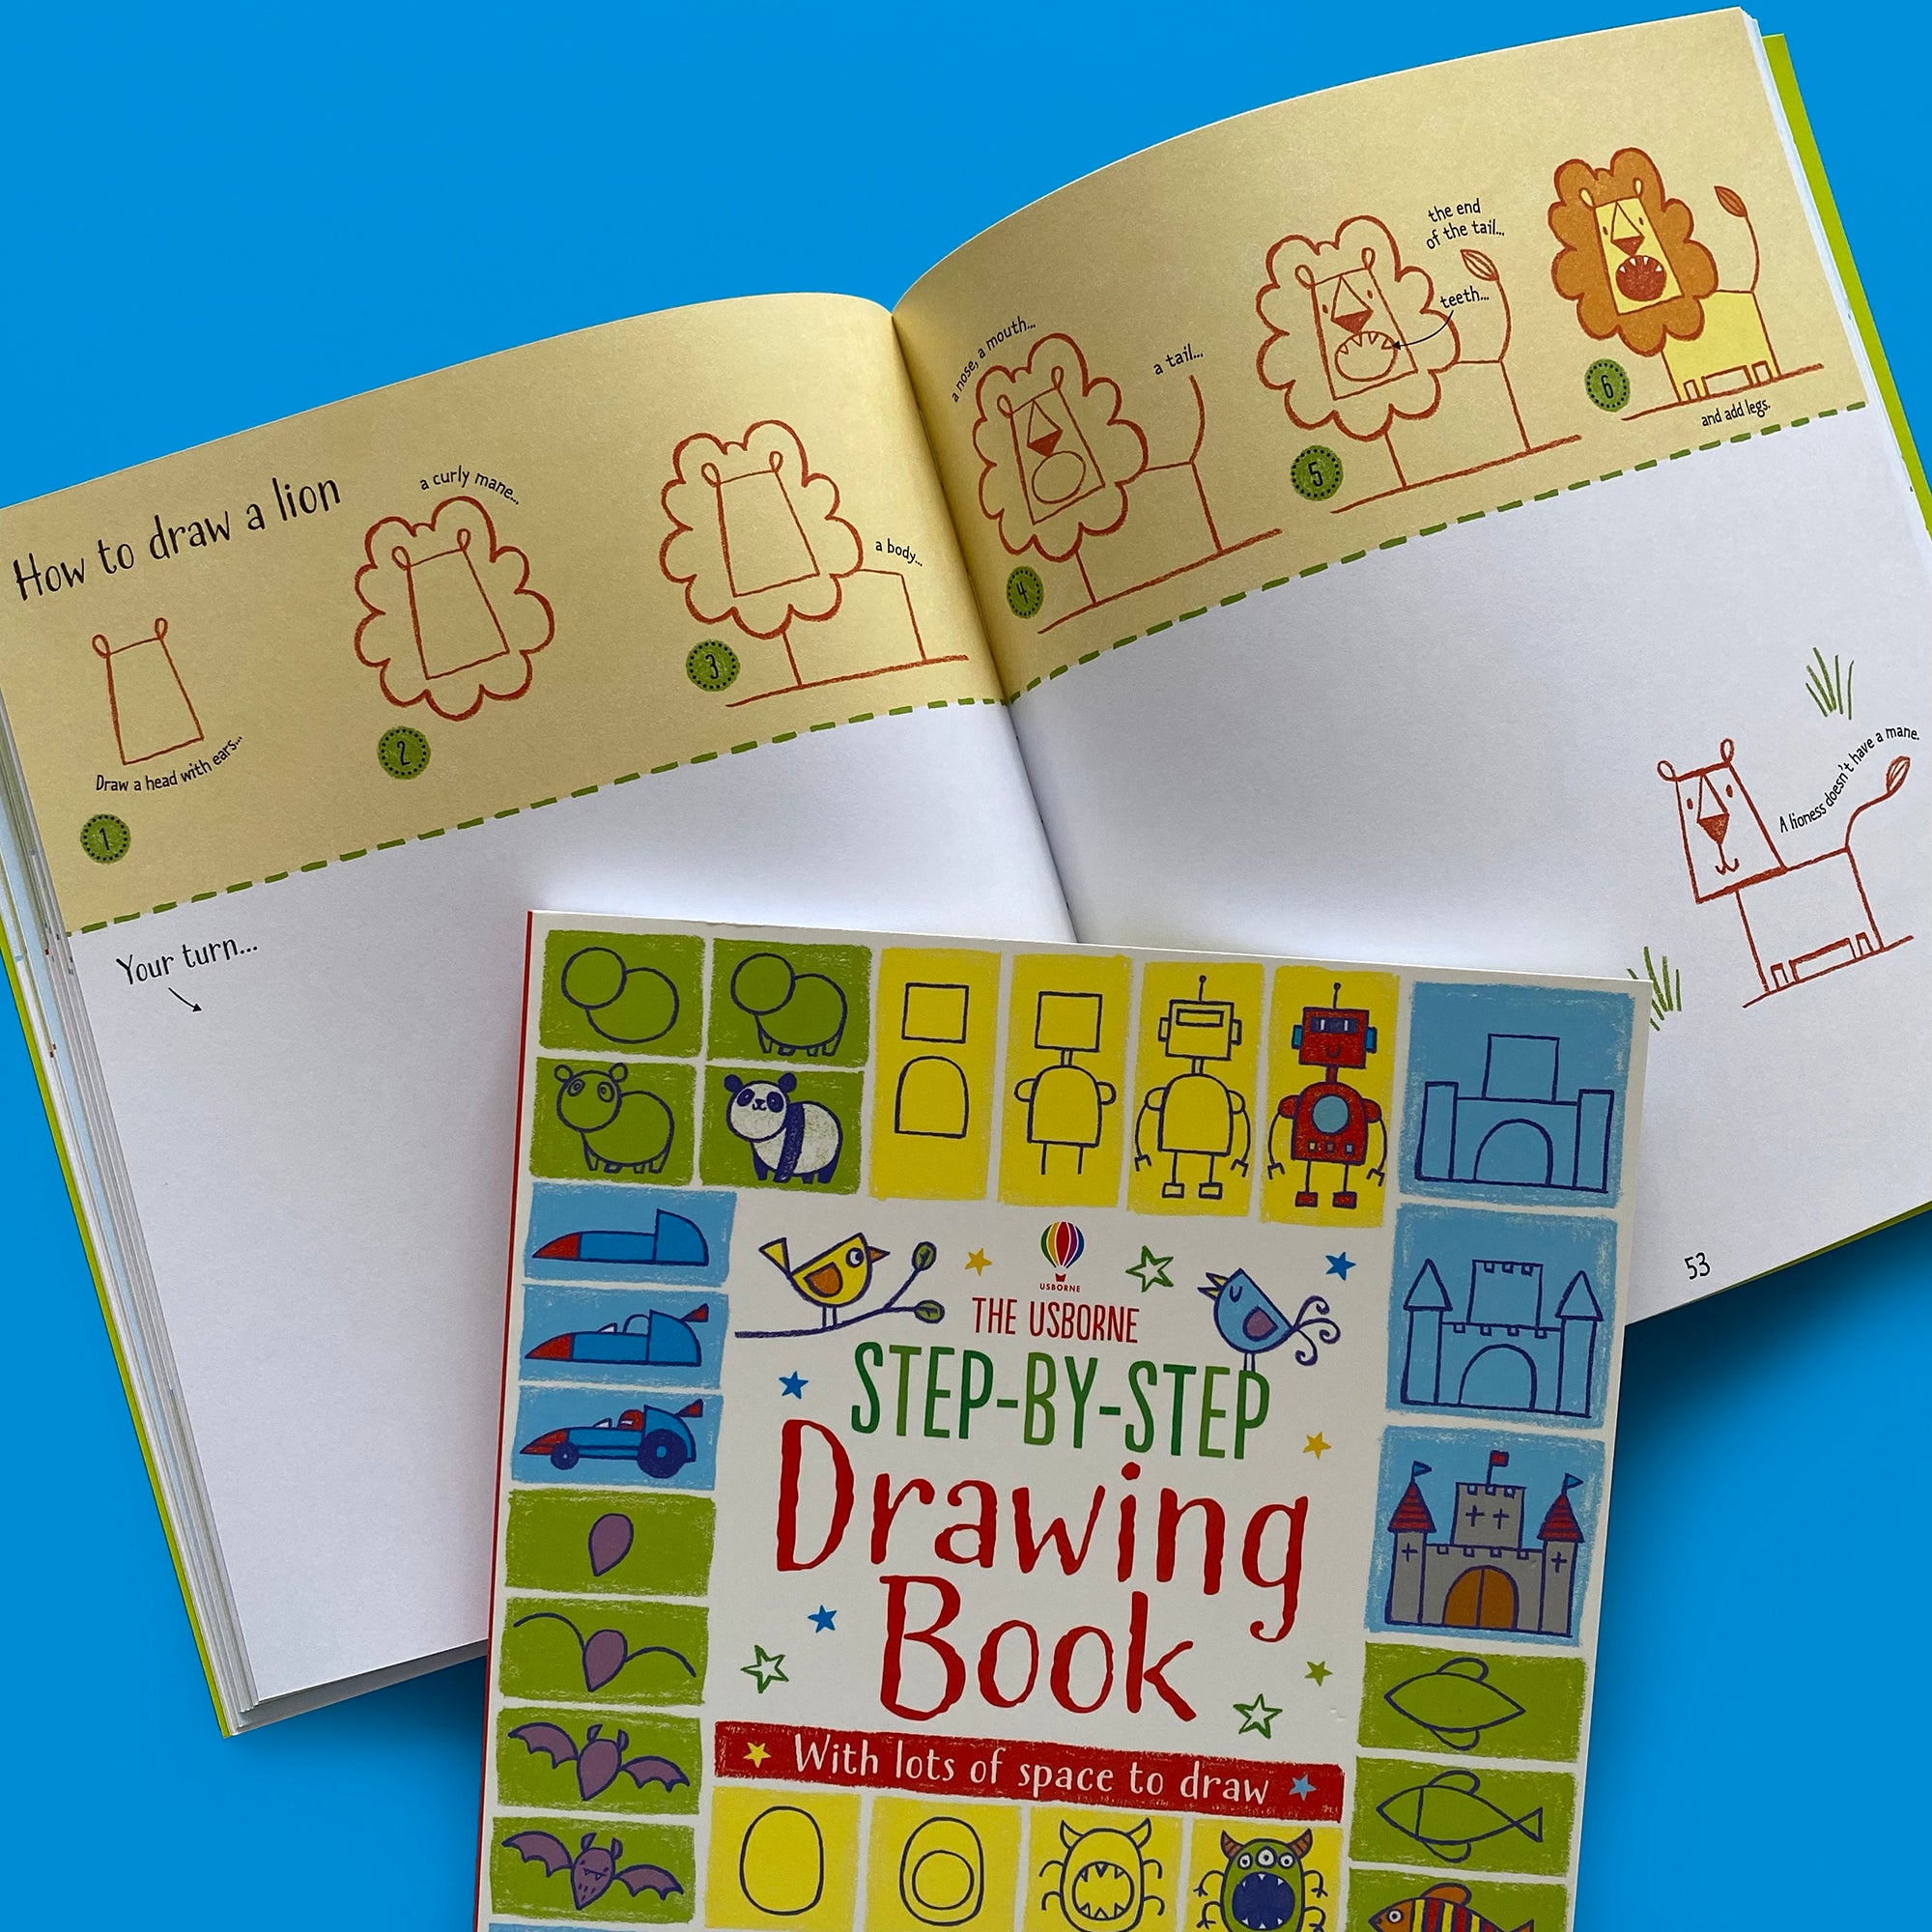 Step-by-Step Drawing Book - Montessori Services